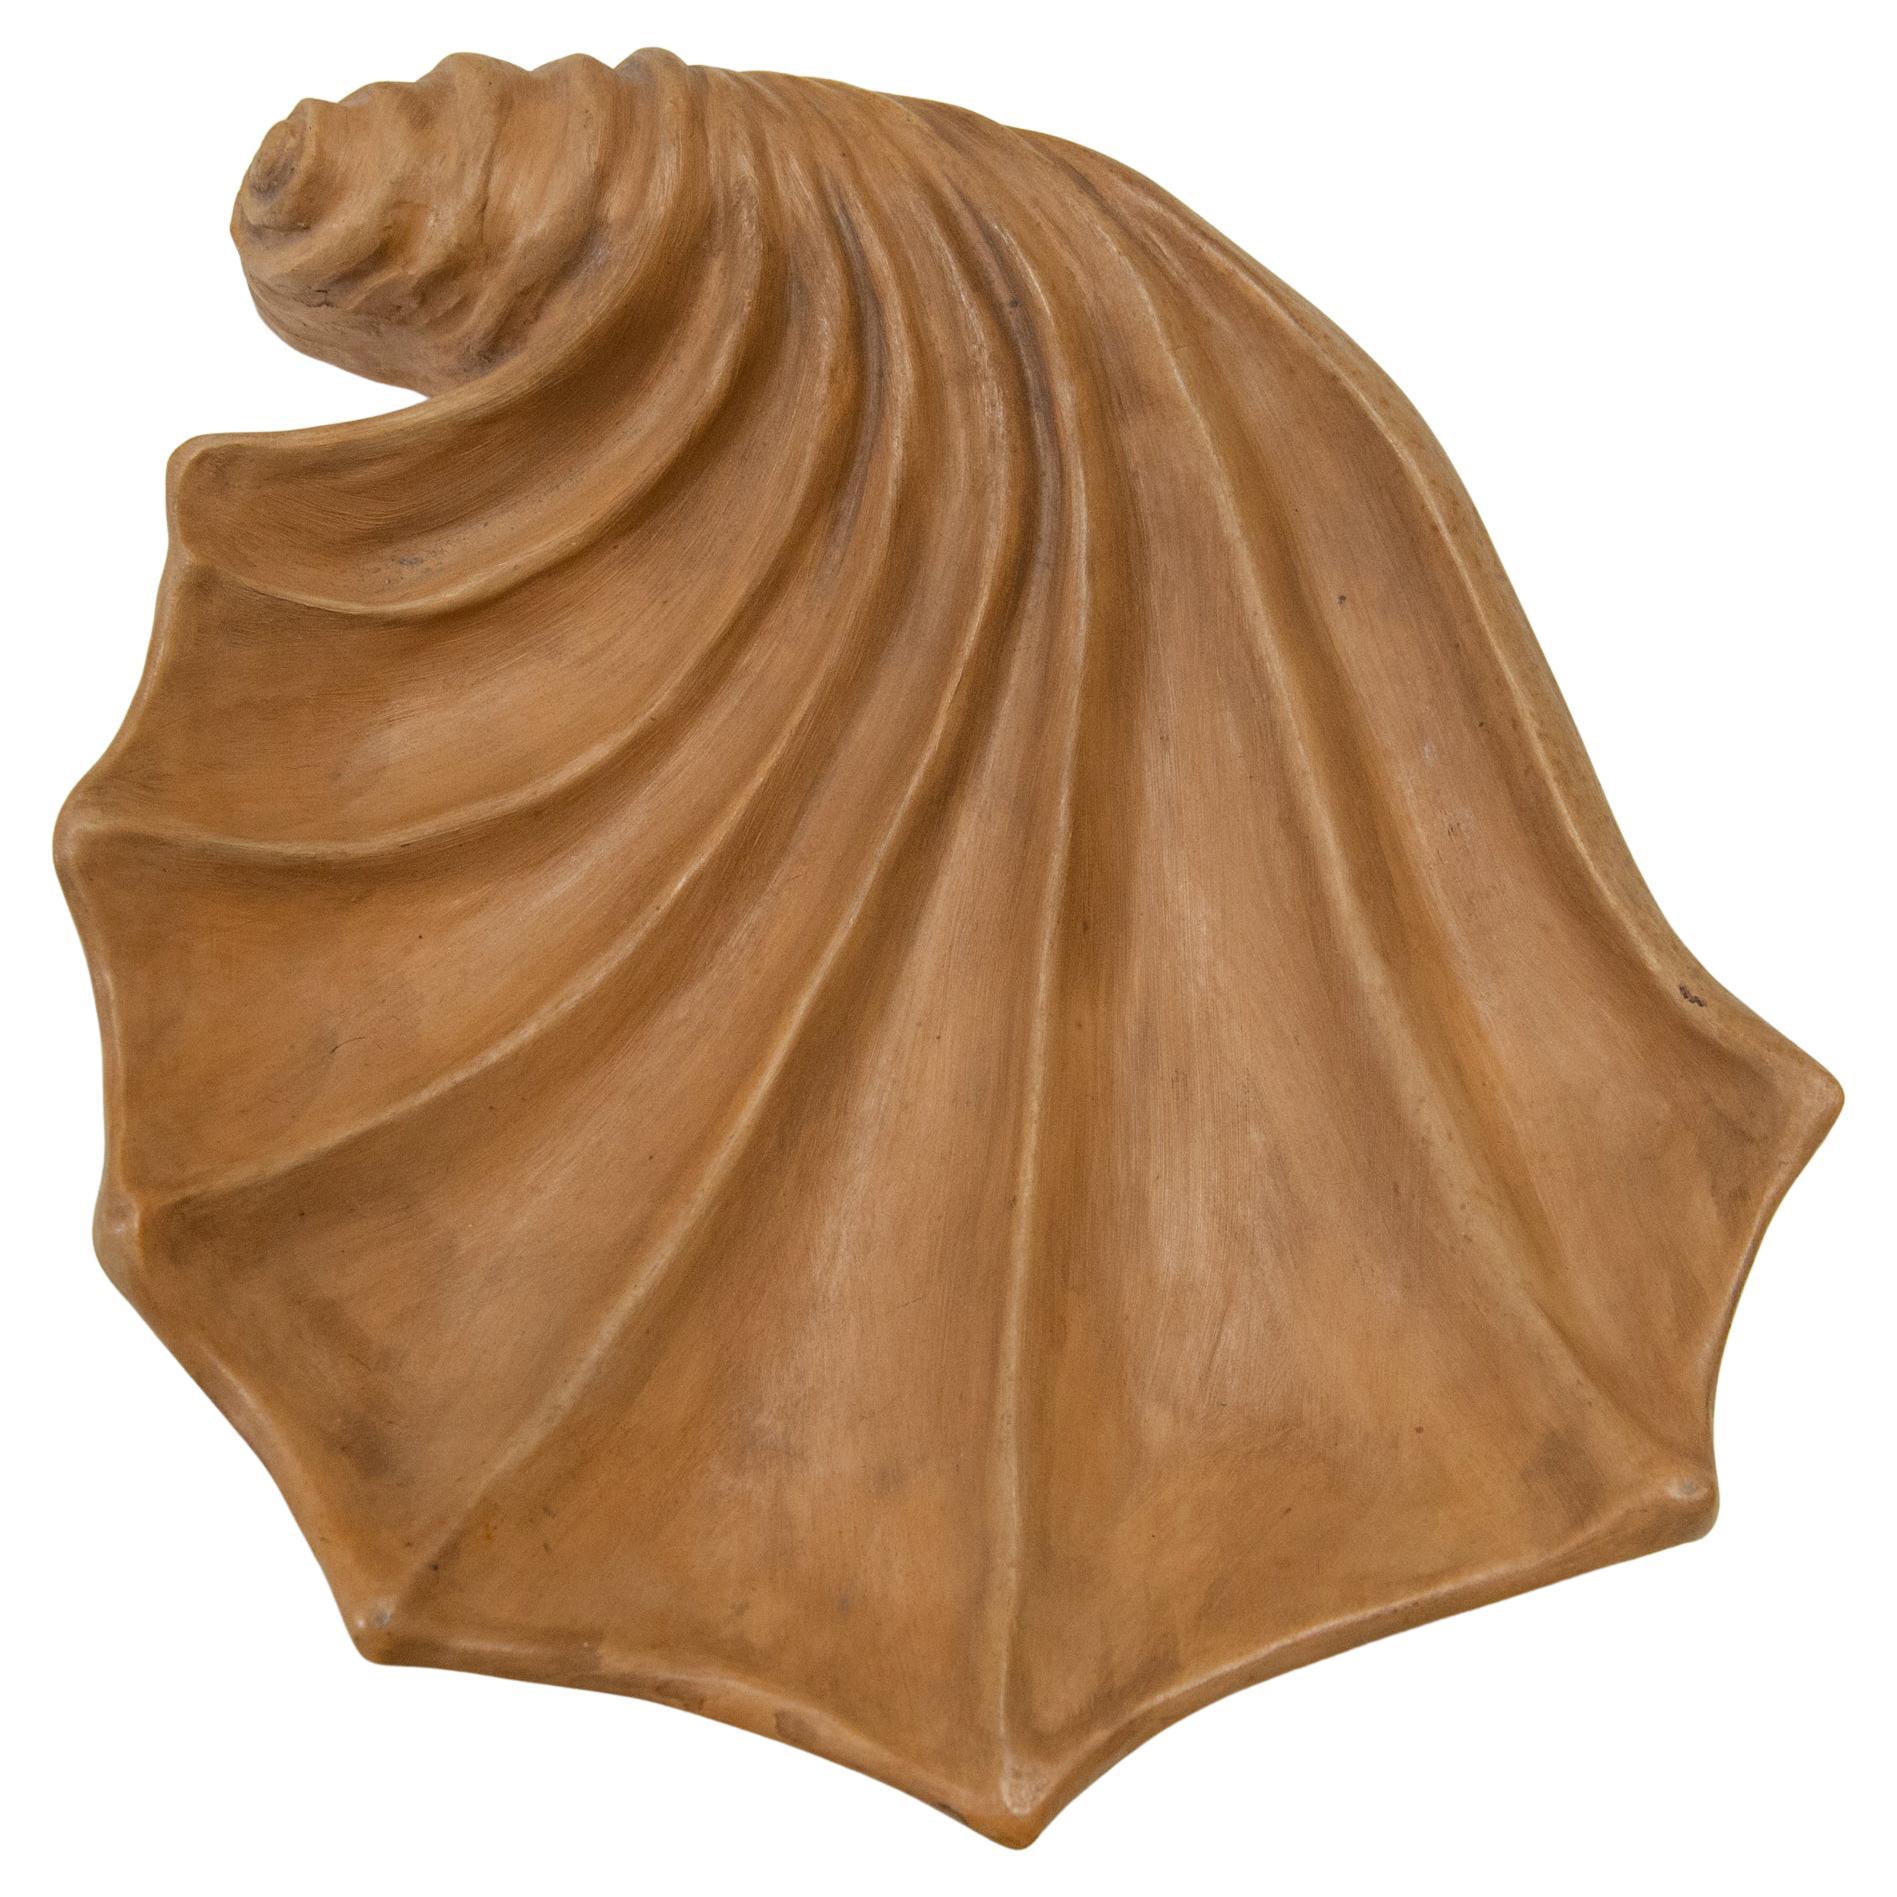 Terracotta Plate Modeled by Hand in the Shape of a Shell